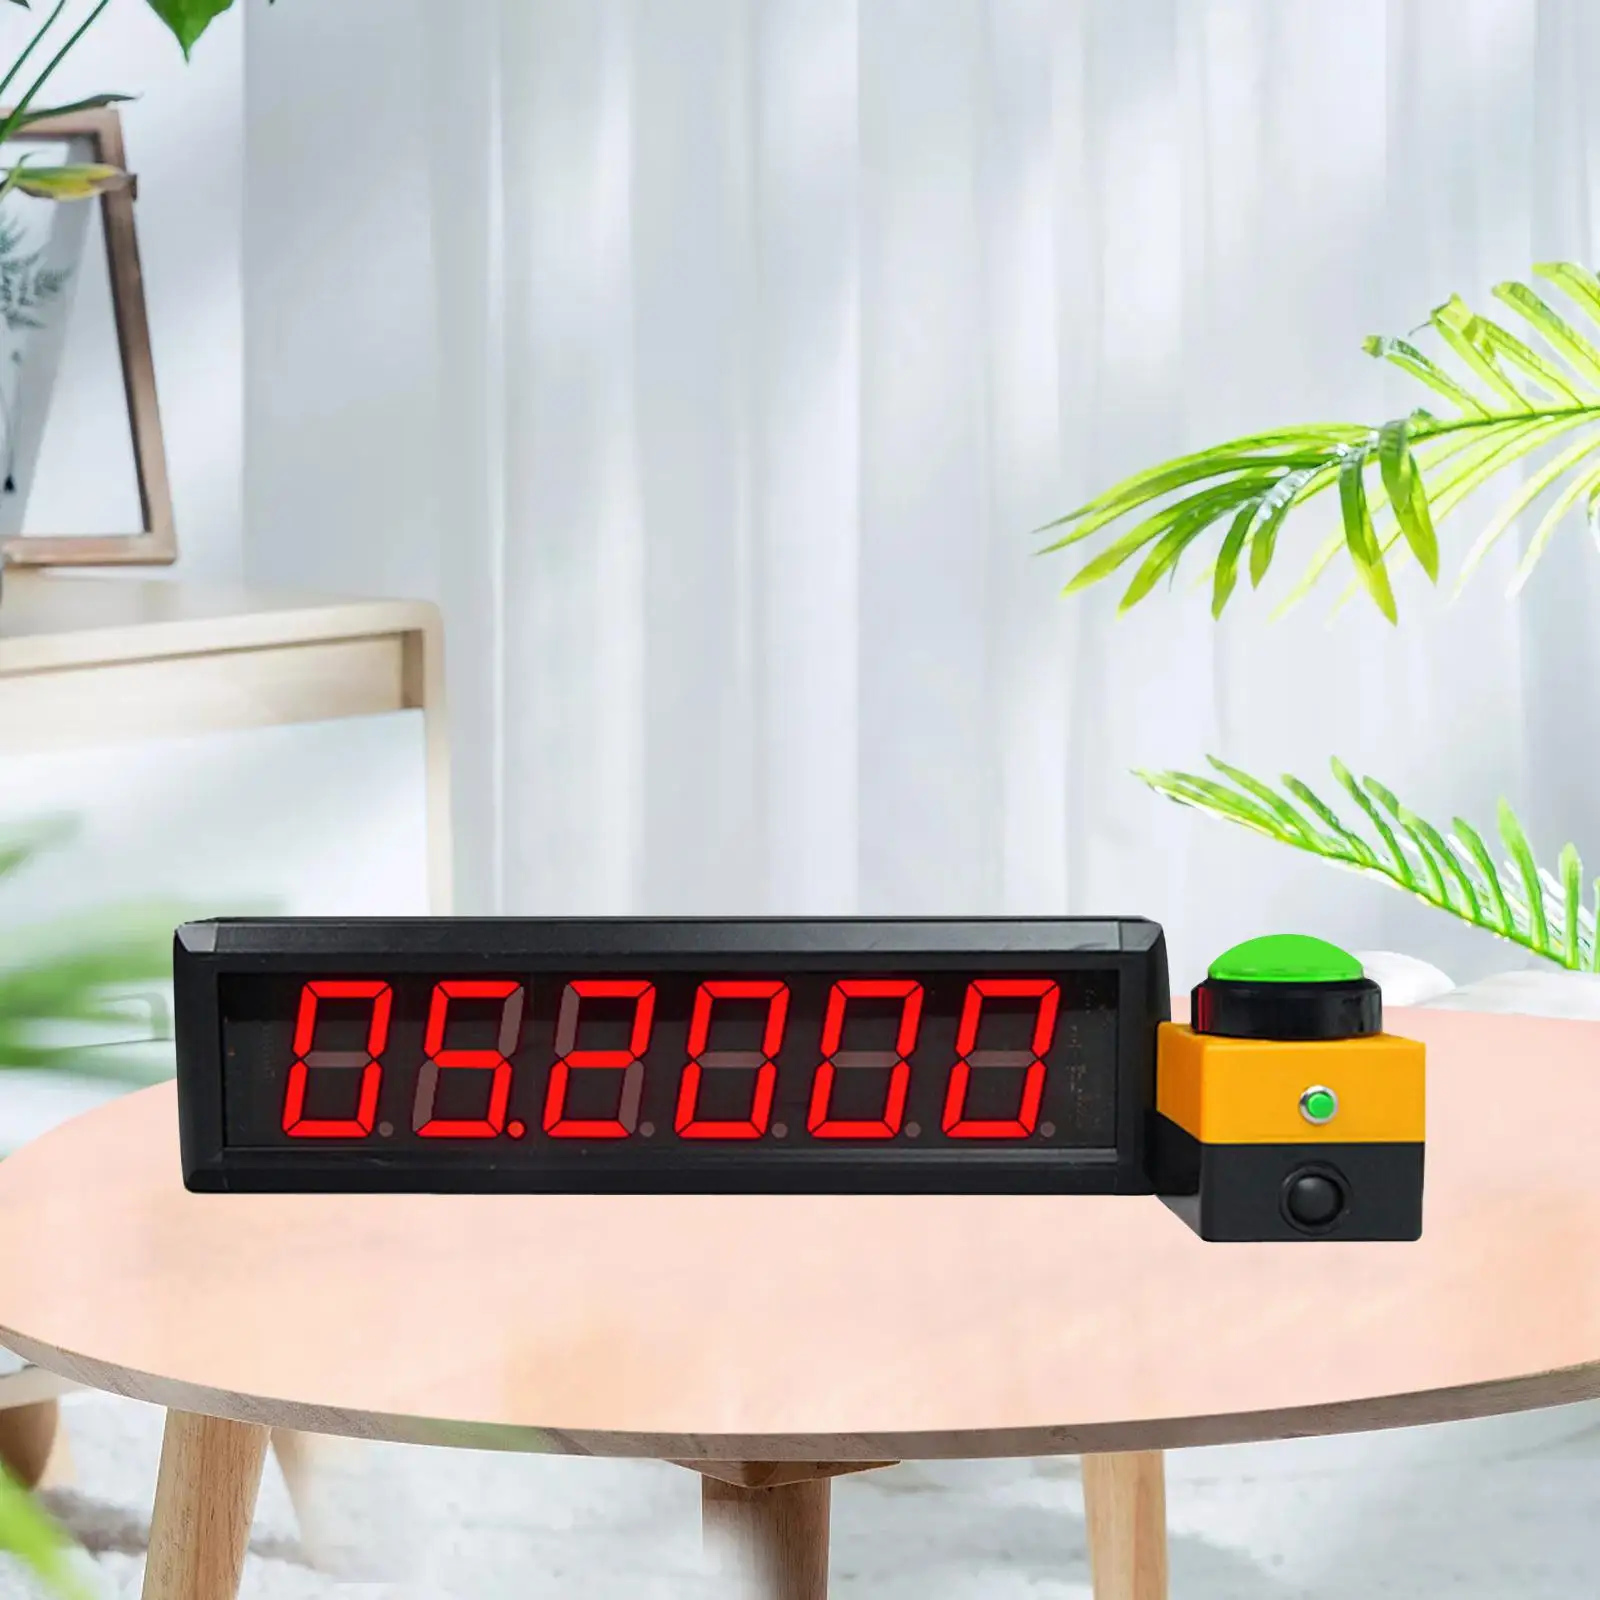 Digital Timer Compact Size LED Display for Home Promotional Activities Gym